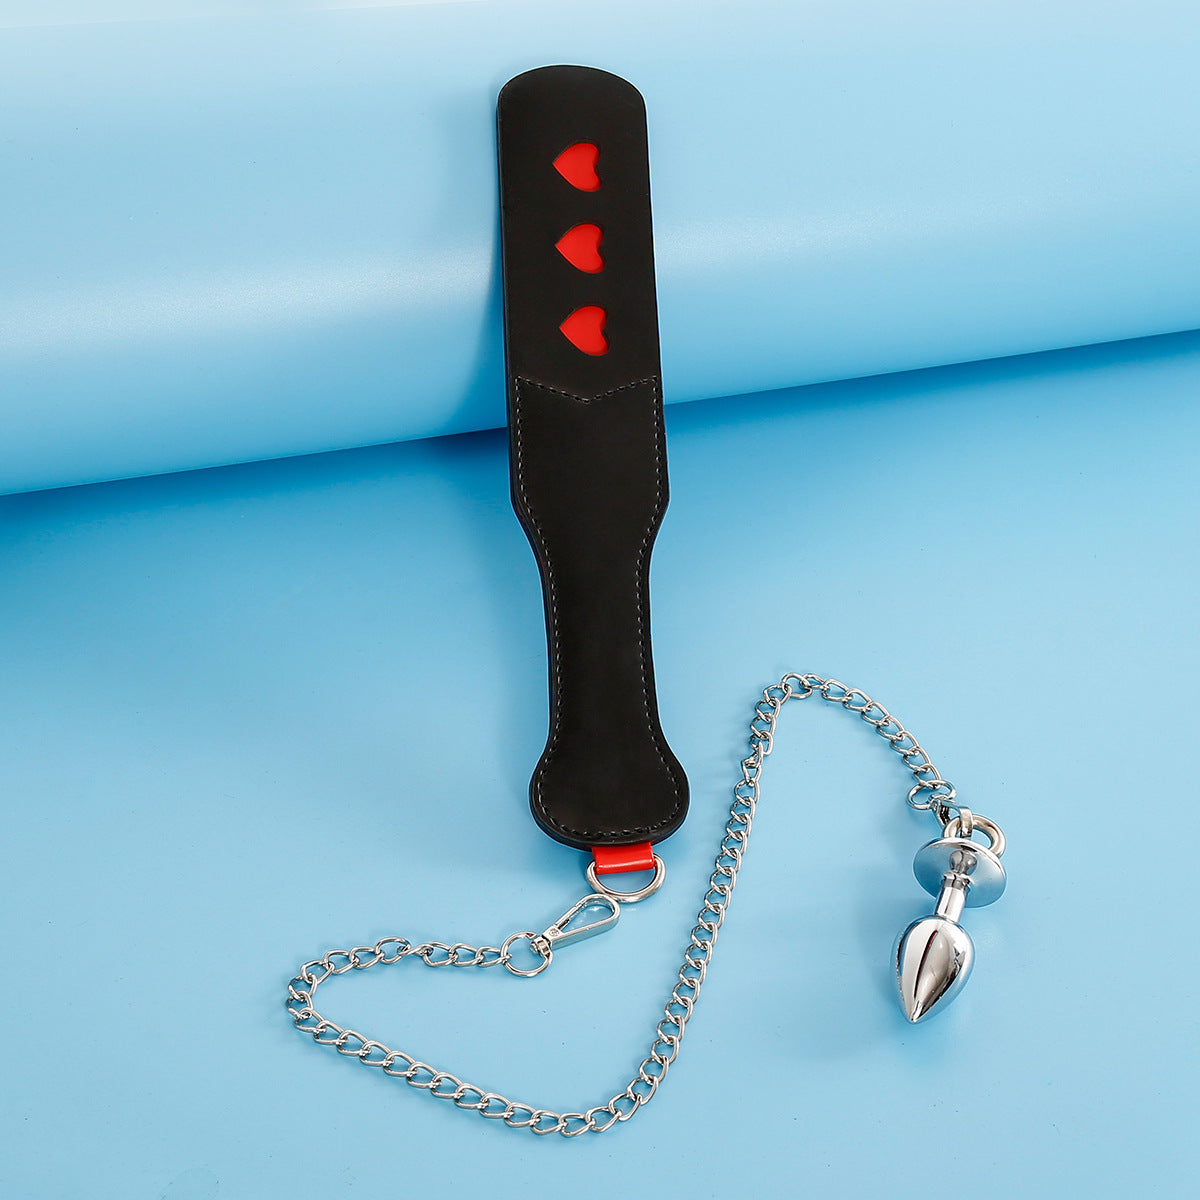 Paddle with Removable Butt Plug - BDSM and Kink Adult Toys Number 1 Adult Toy Store. From Tame to KINKY